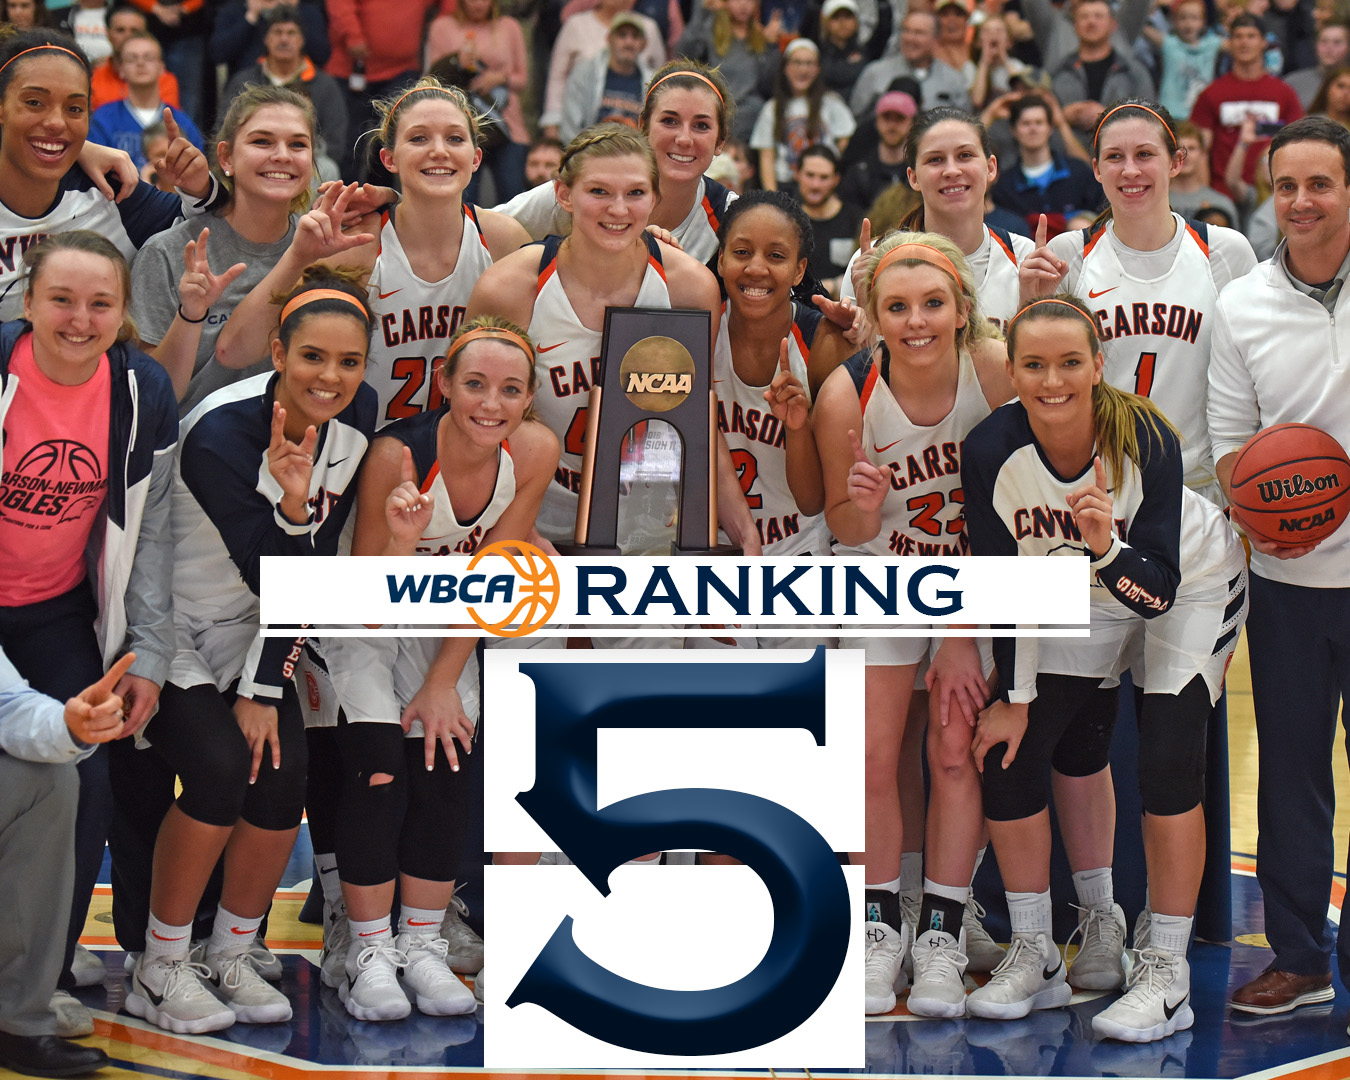 C-N finishes season ranked fifth, highest mark in SAC history